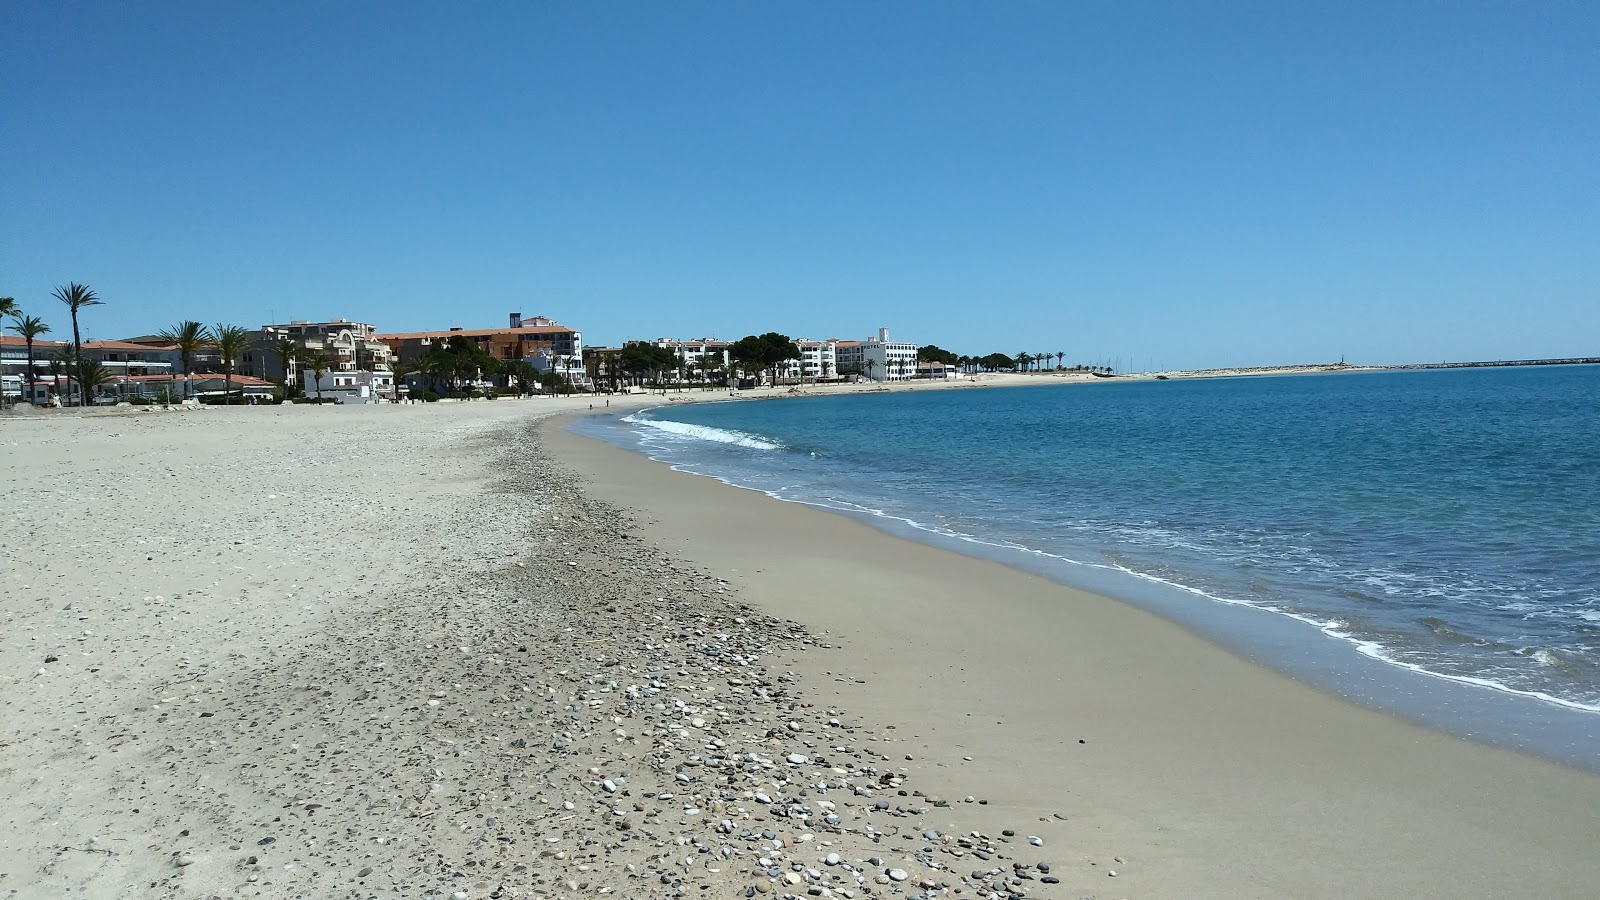 Photo of L'Hospitalet beach with turquoise water surface